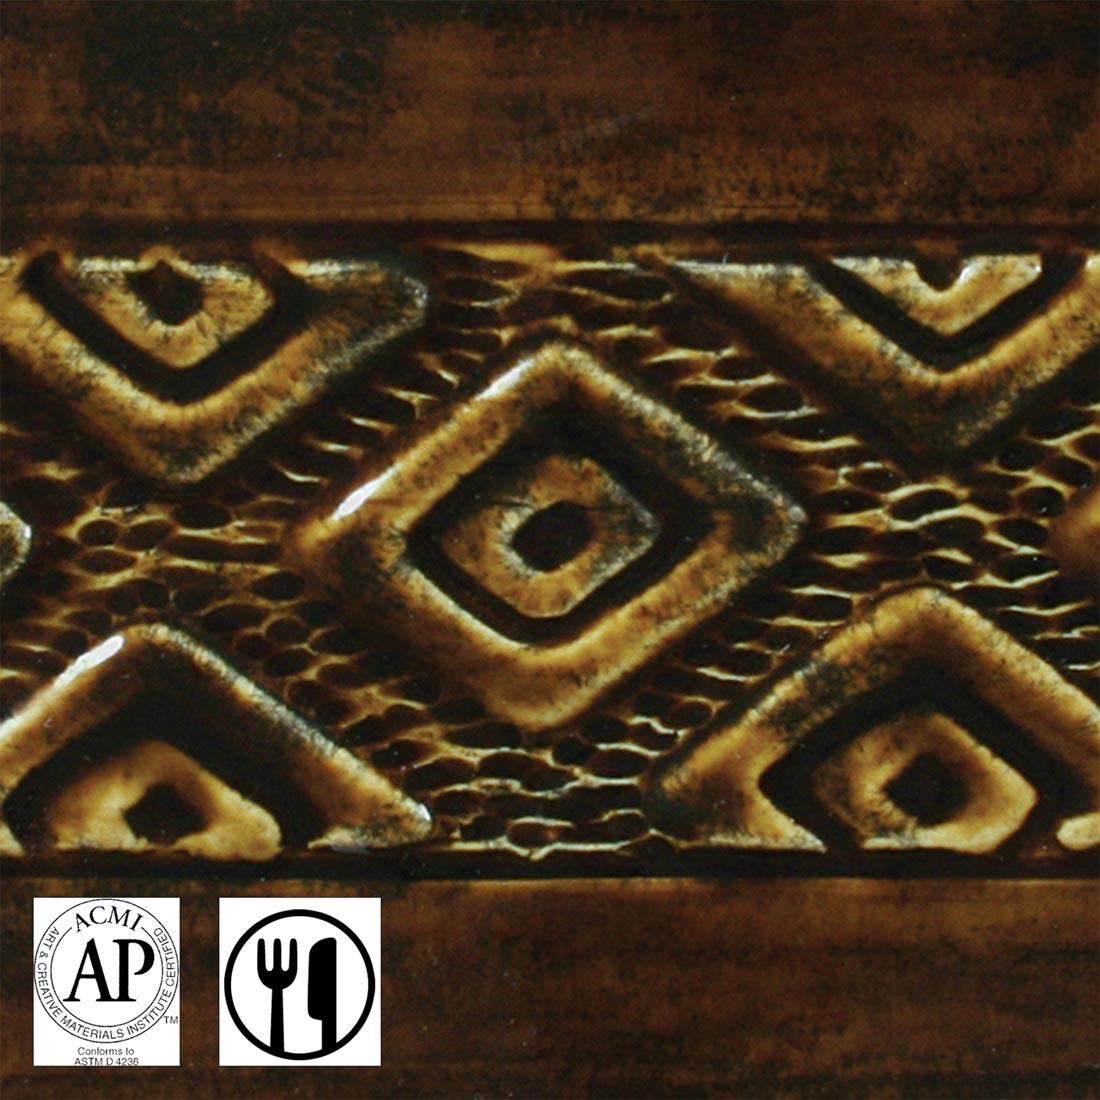 clay tile with Textured Amber Brown AMACO Potter's Choice High Fire Glaze applied; symbols for AP Seal and food safe